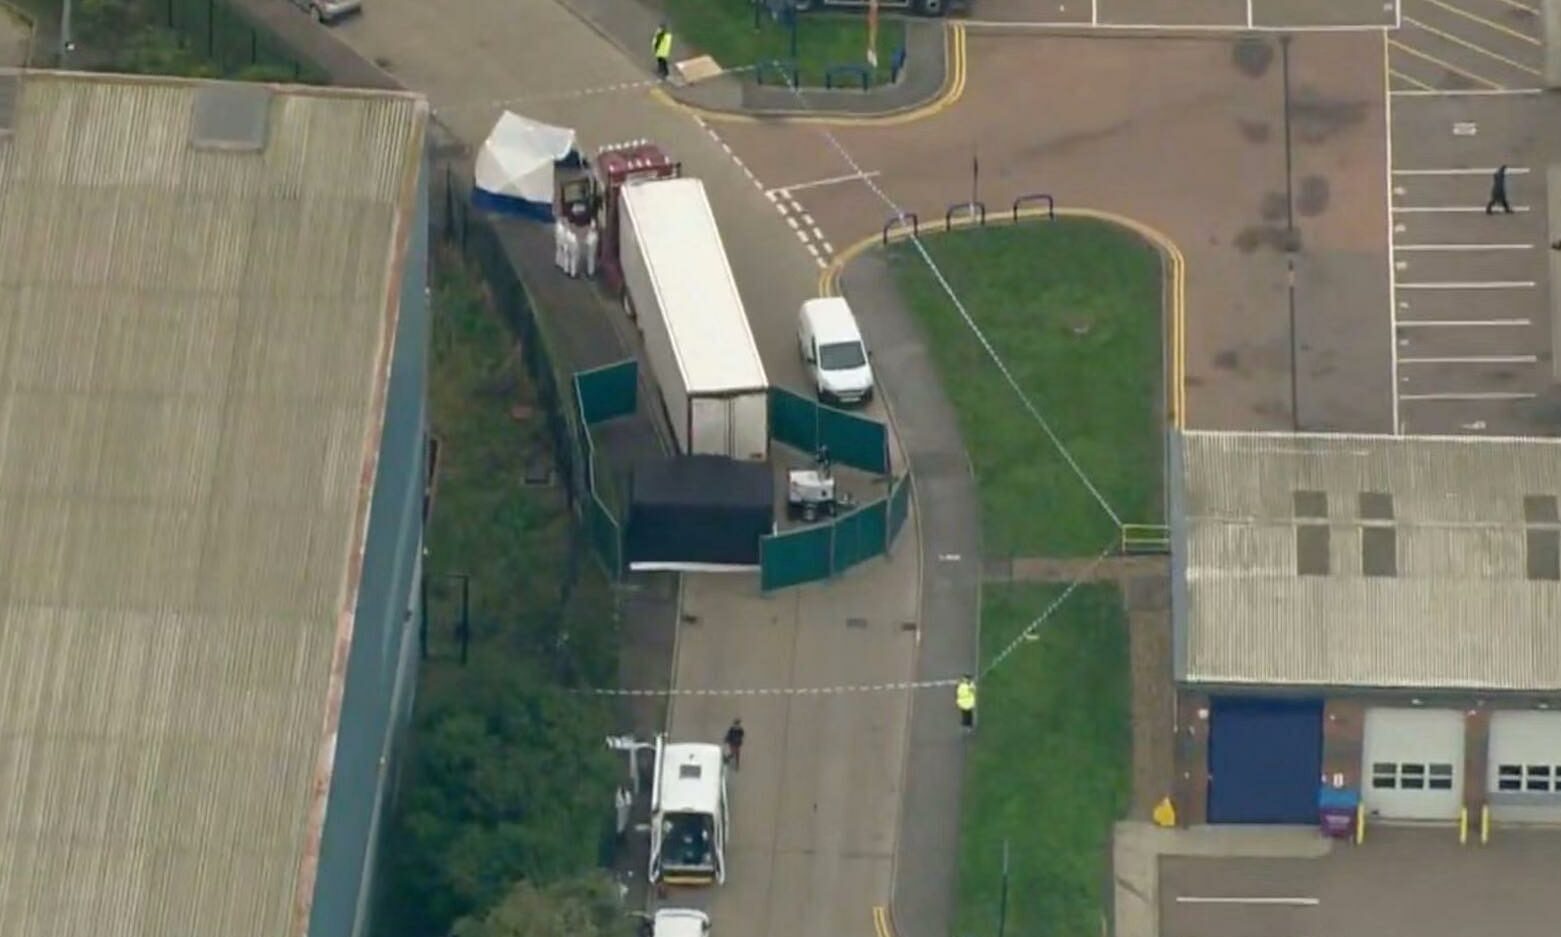 39 people died in container trucks in Essex, England. Two suspects were convicted of manslaughter.